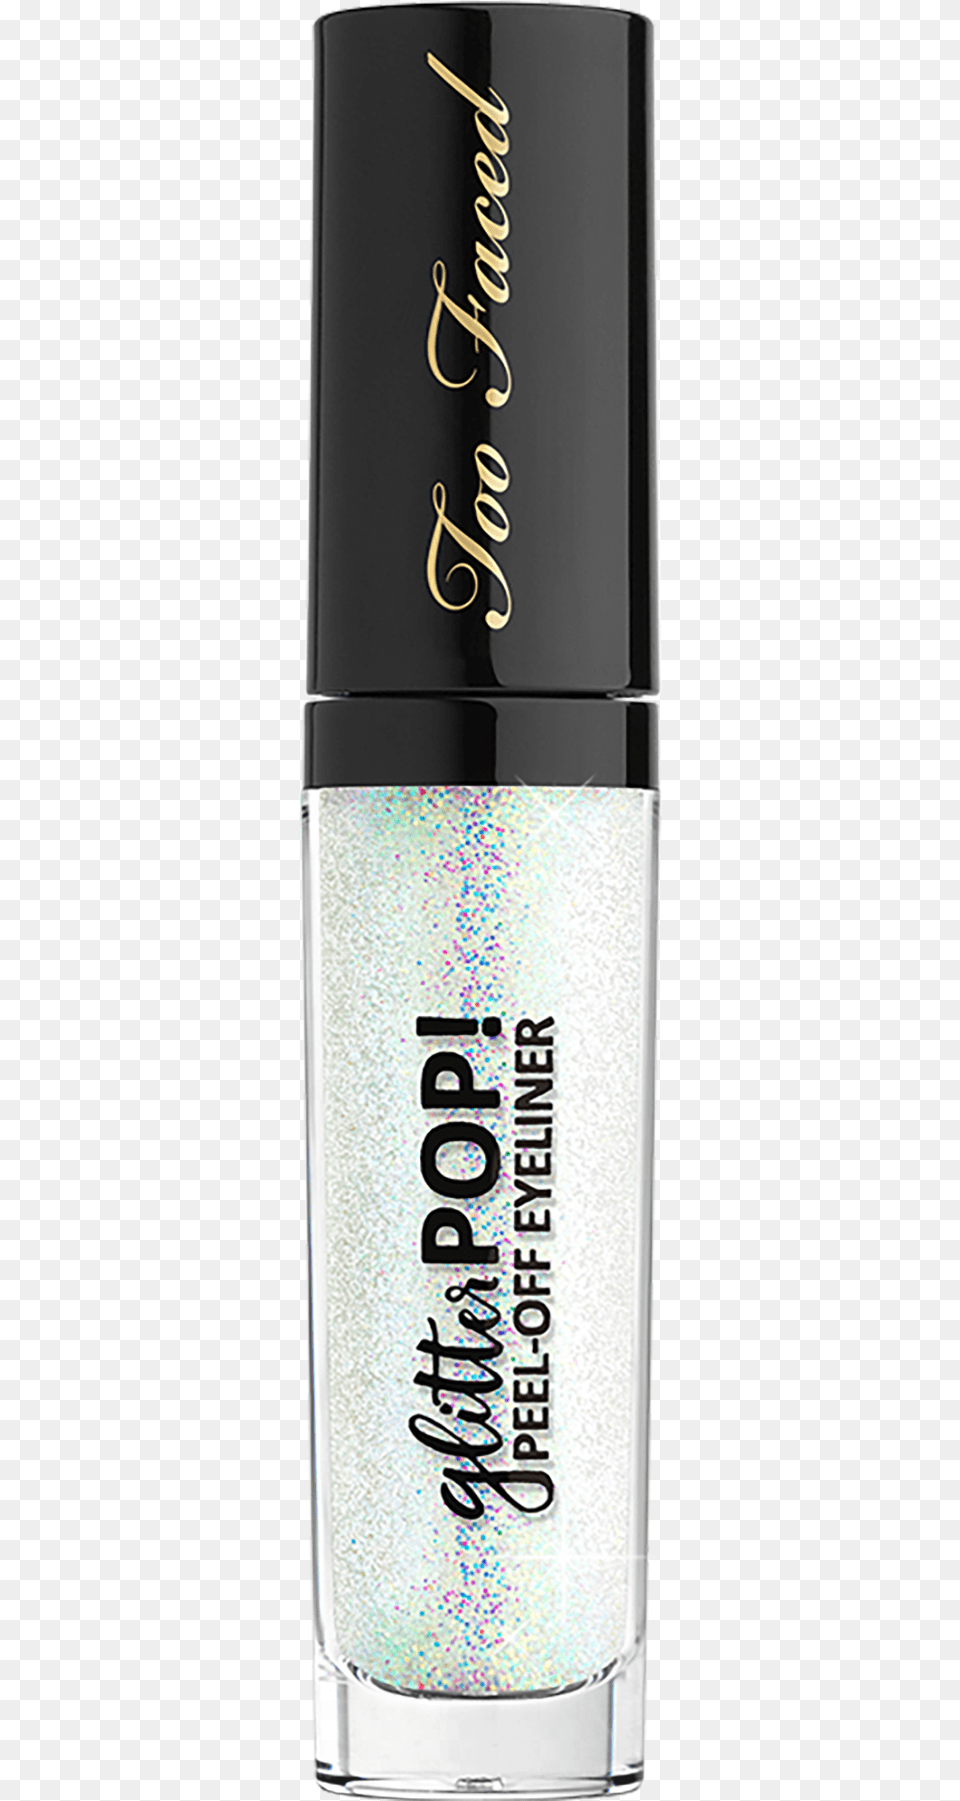 Glitter Delineador Too Faced, Cosmetics Png Image